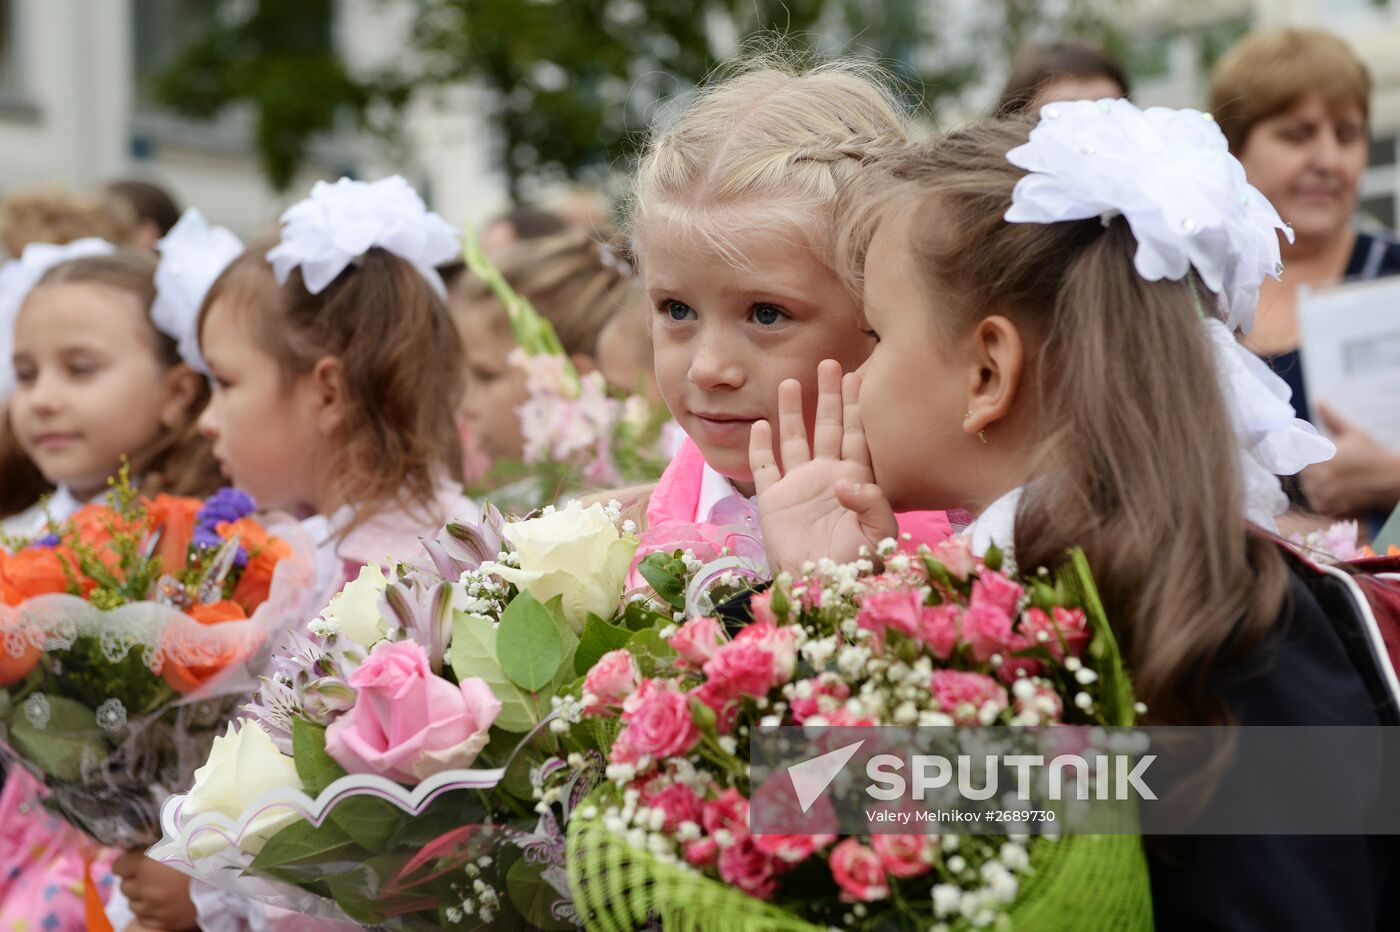 Academic year begins in Moscow